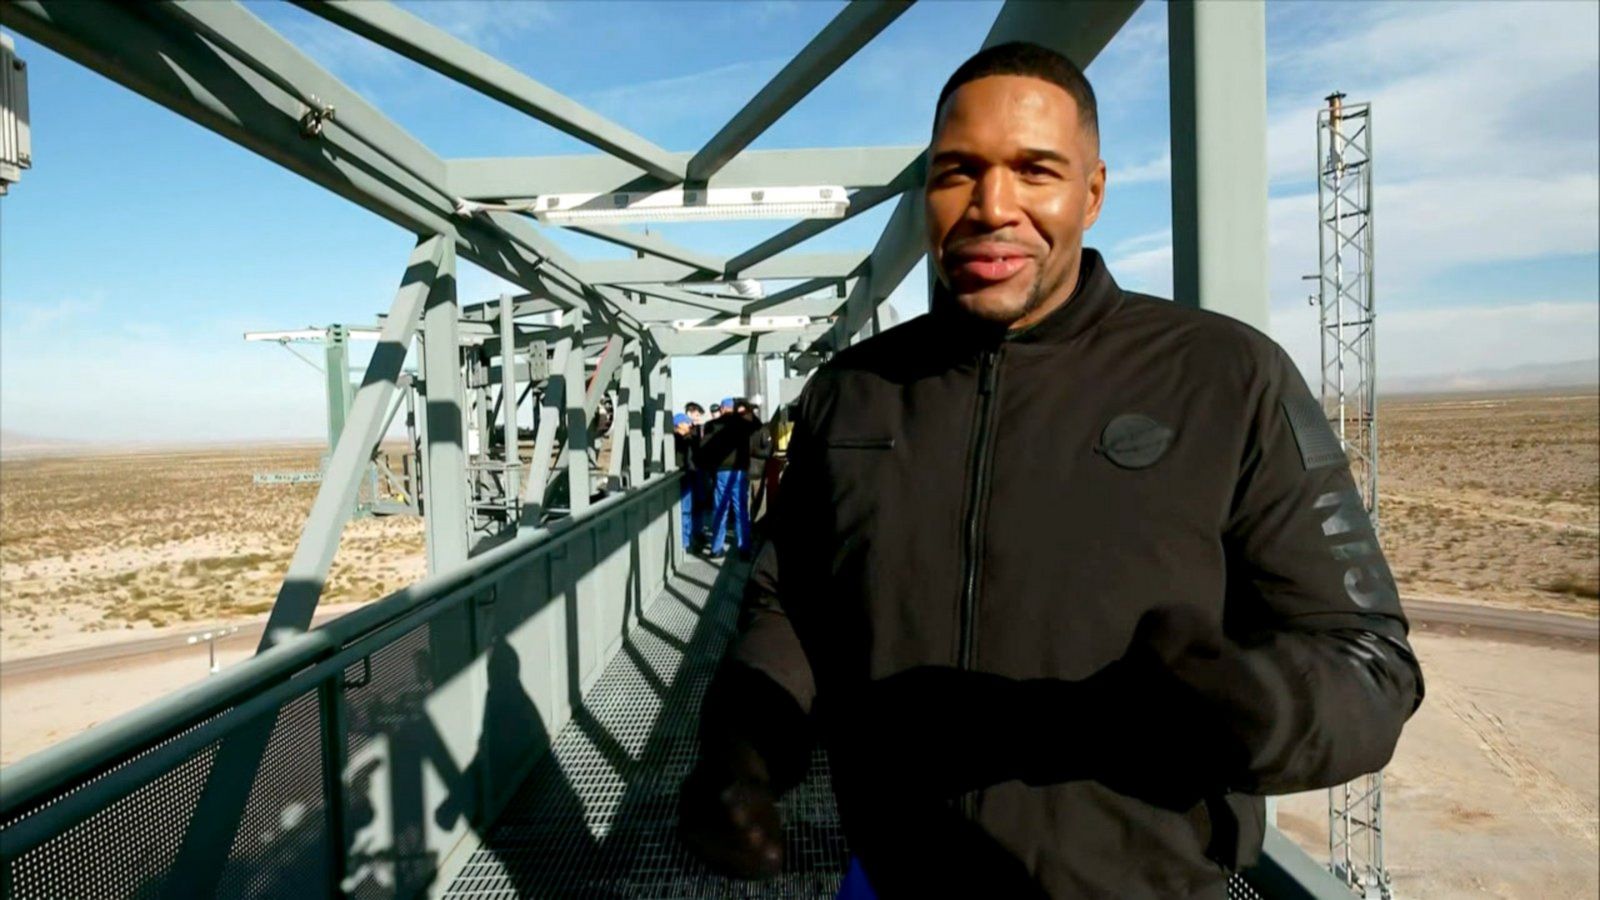 Final preparation for Michael Strahan's space travel - Good Morning America